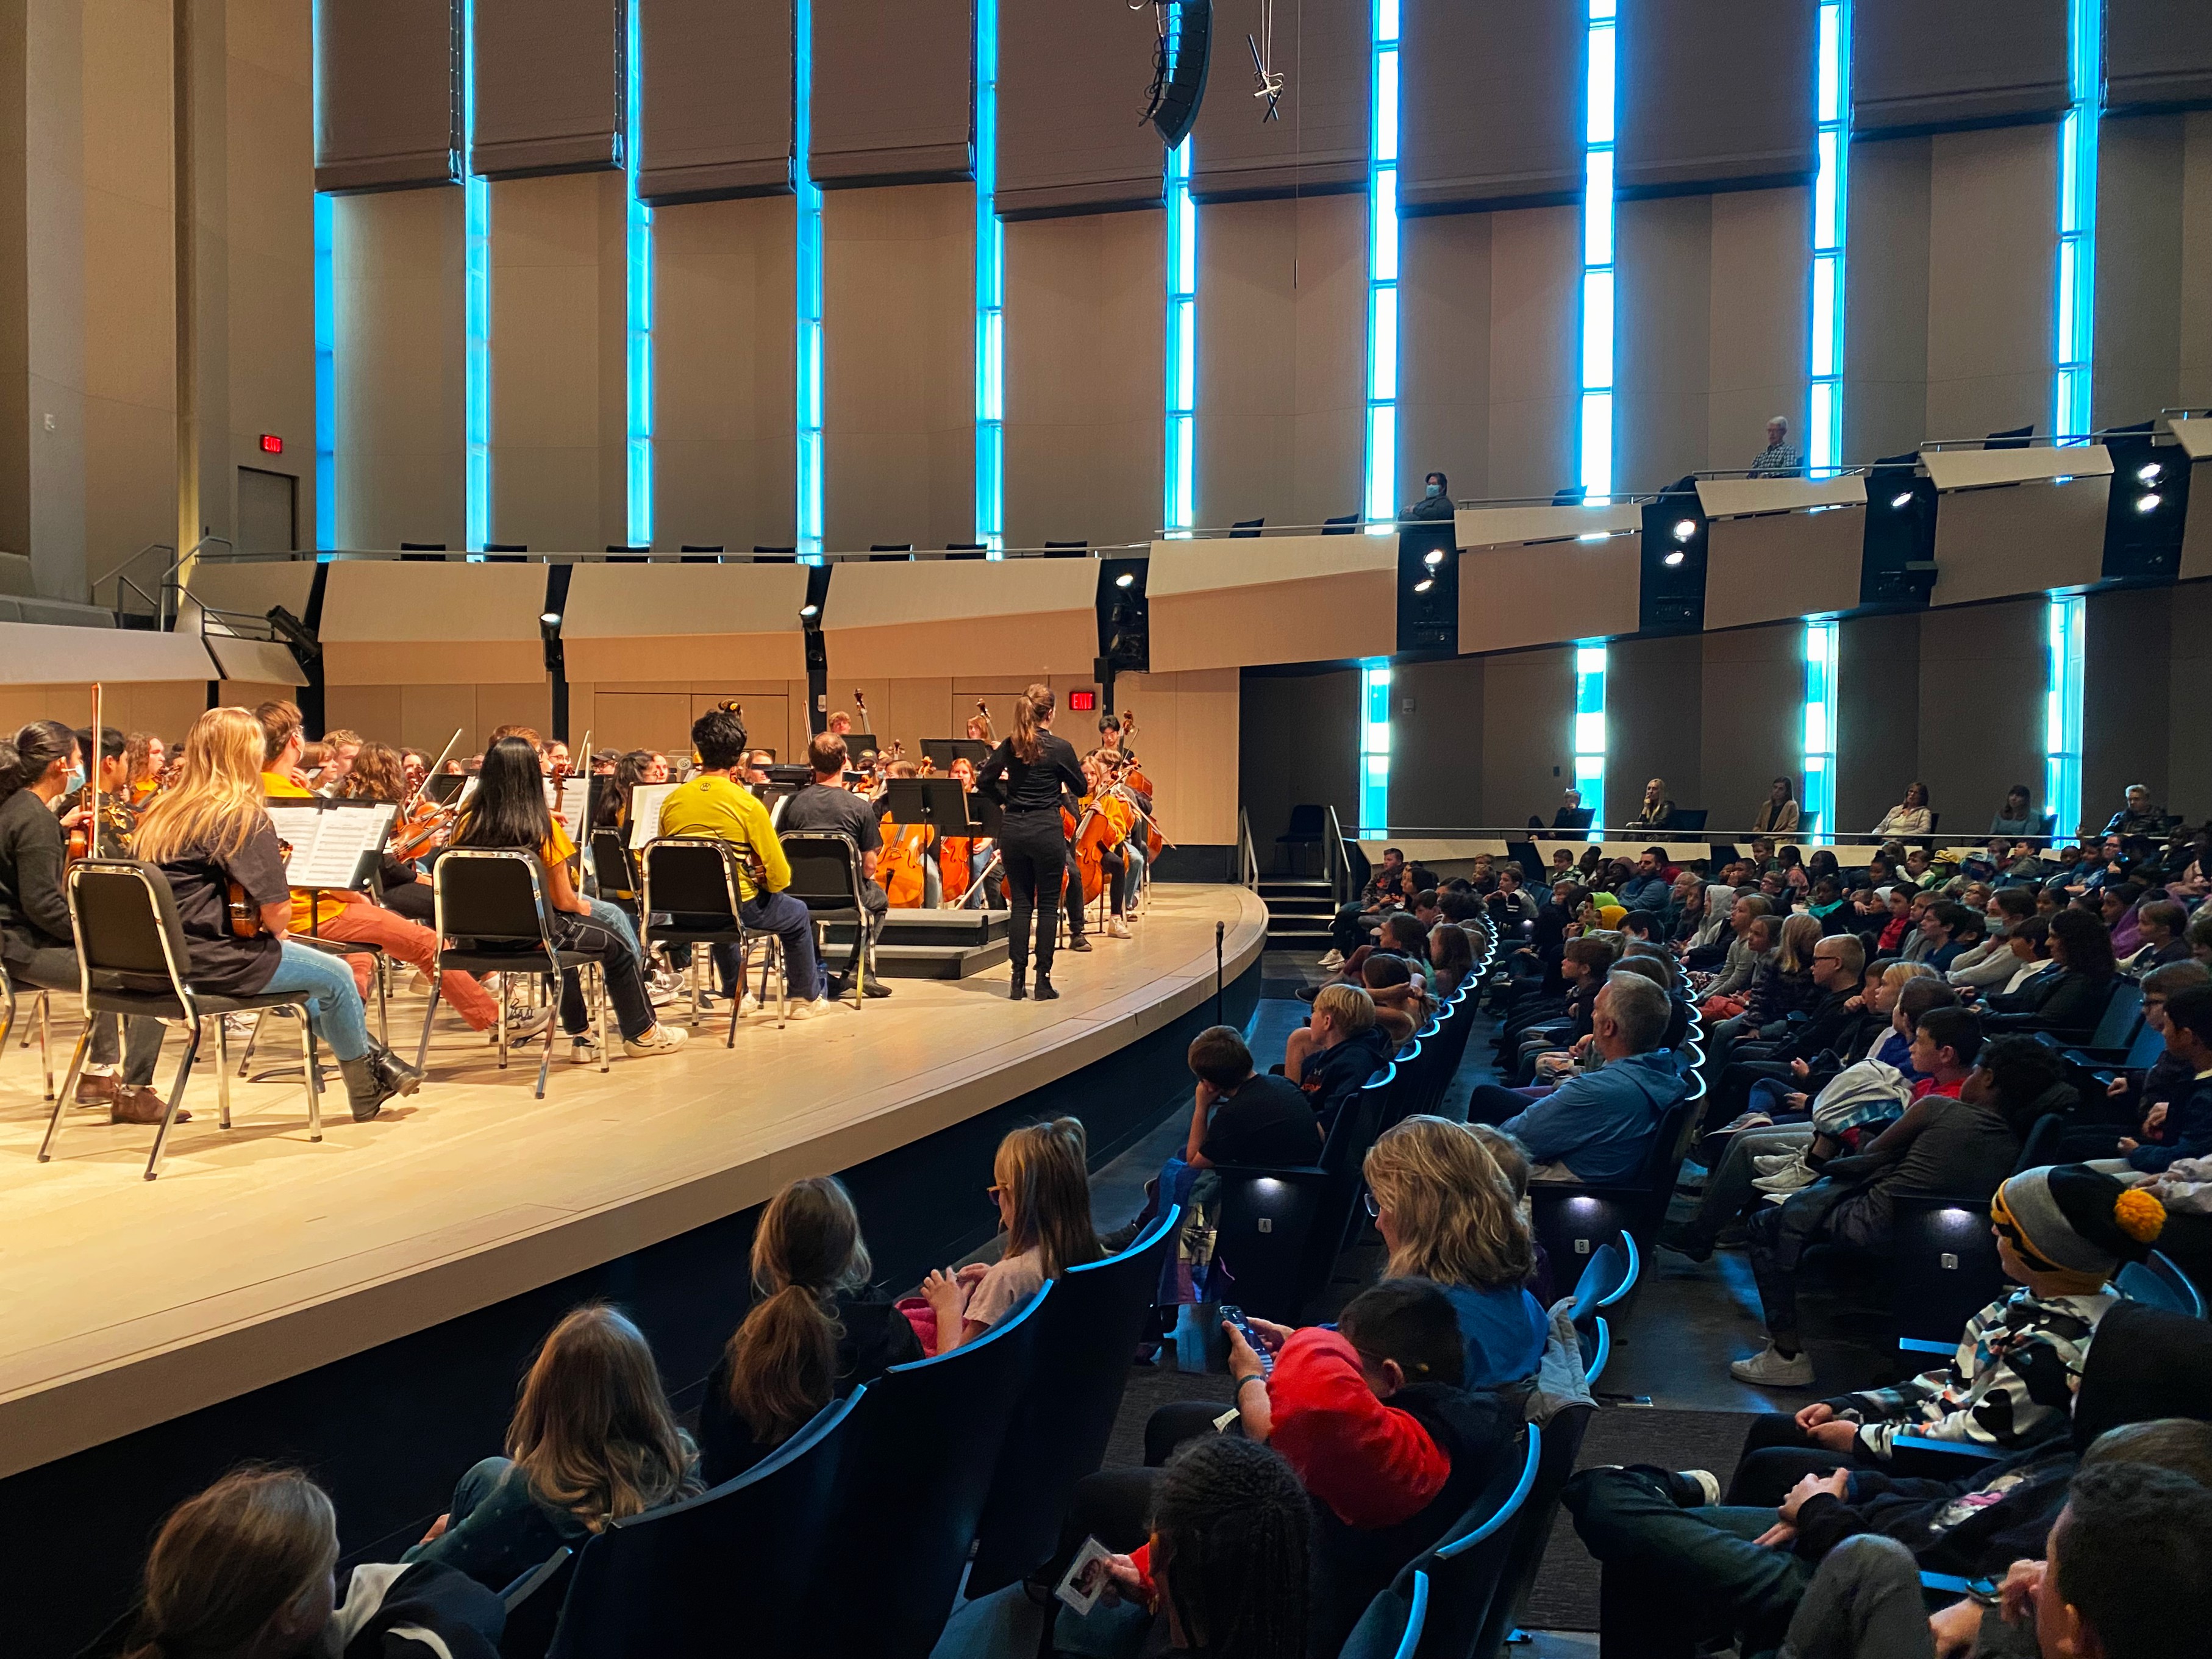 4th grade students from Iowa City Schools enjoying an orchestra performance.